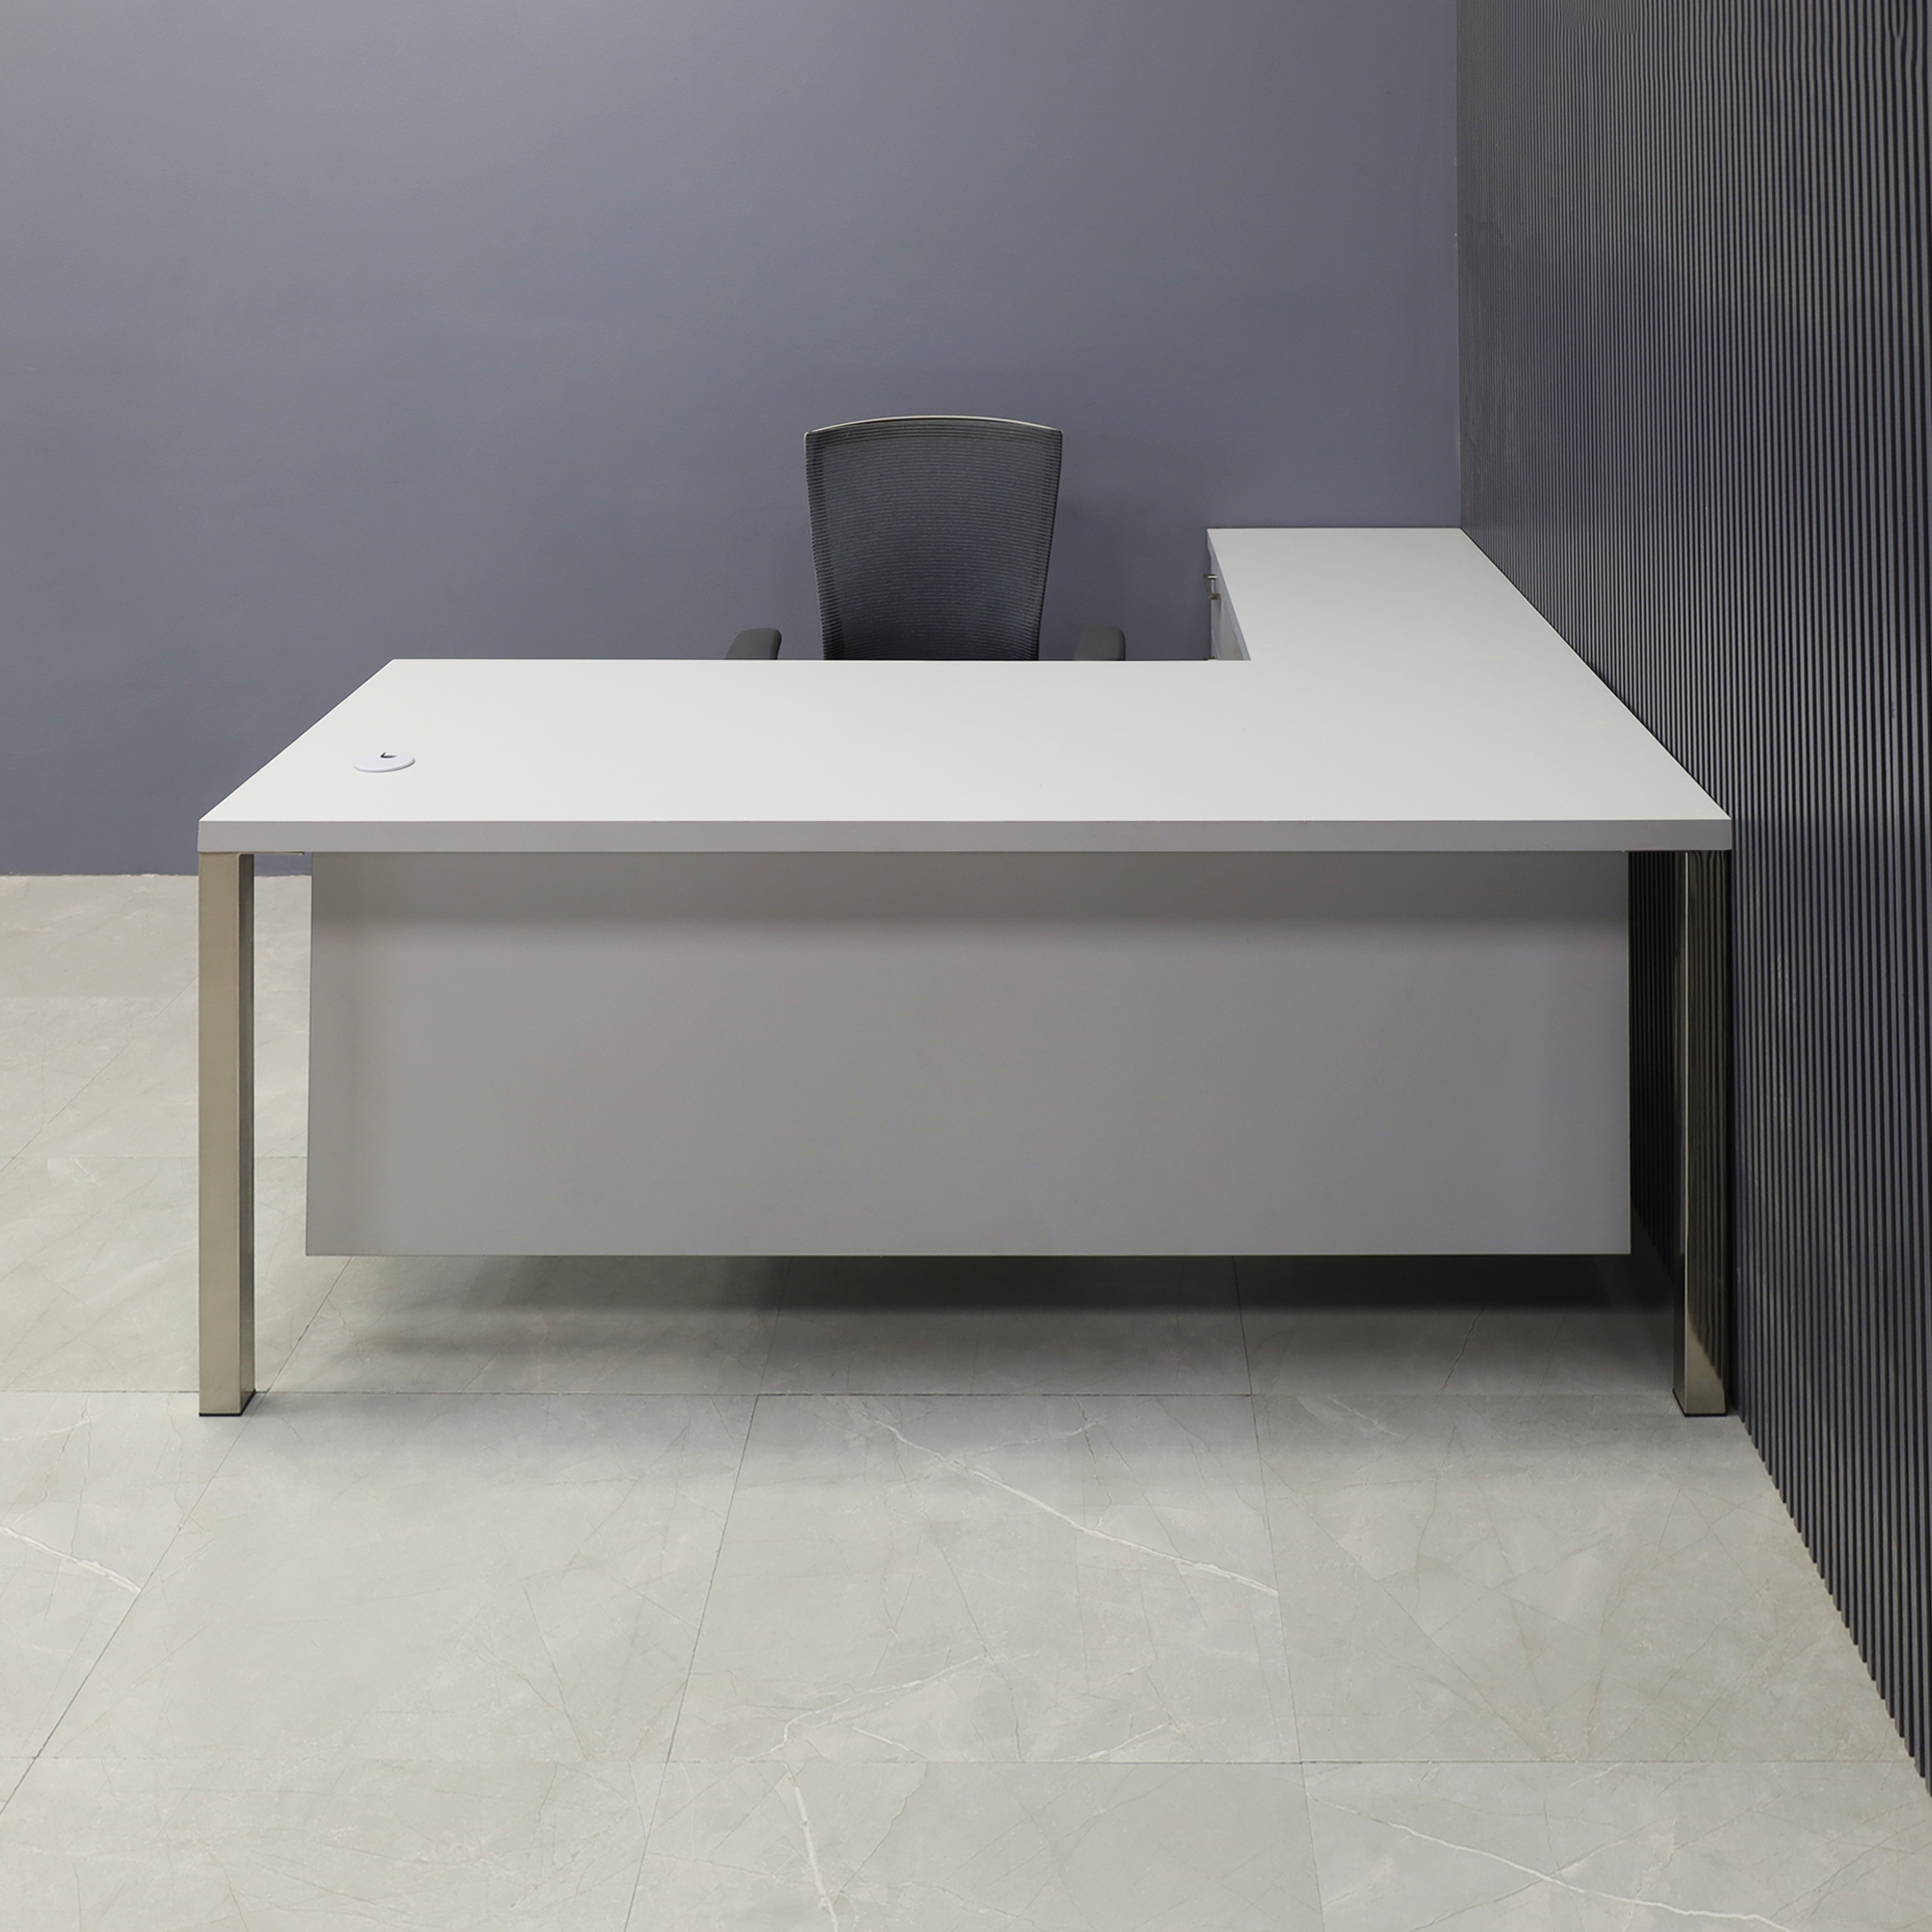 72-inch Dallas L-Shape Executive Desk with return & cabinet on left side when sitting, in folkstone gray matte laminate top, cabinet & privacy panel, and brushed aluminum legs, shown here.